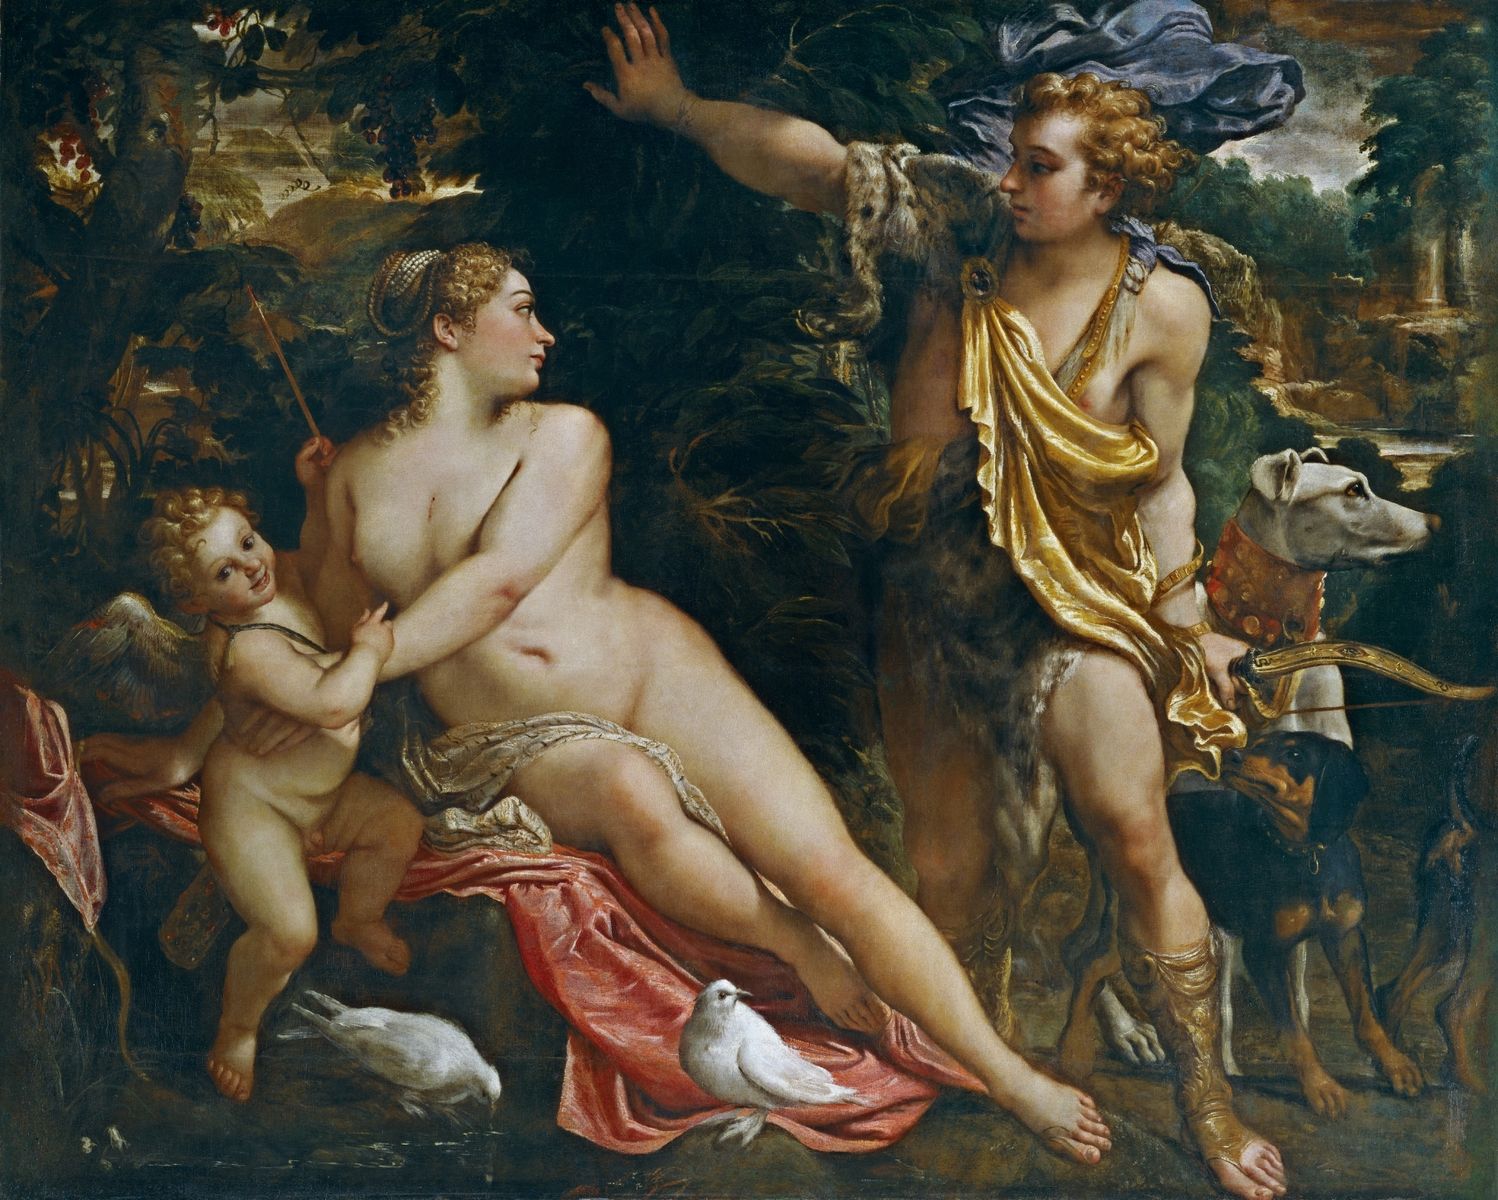 Venus, Adonis and Cupid by Annibale Carracci